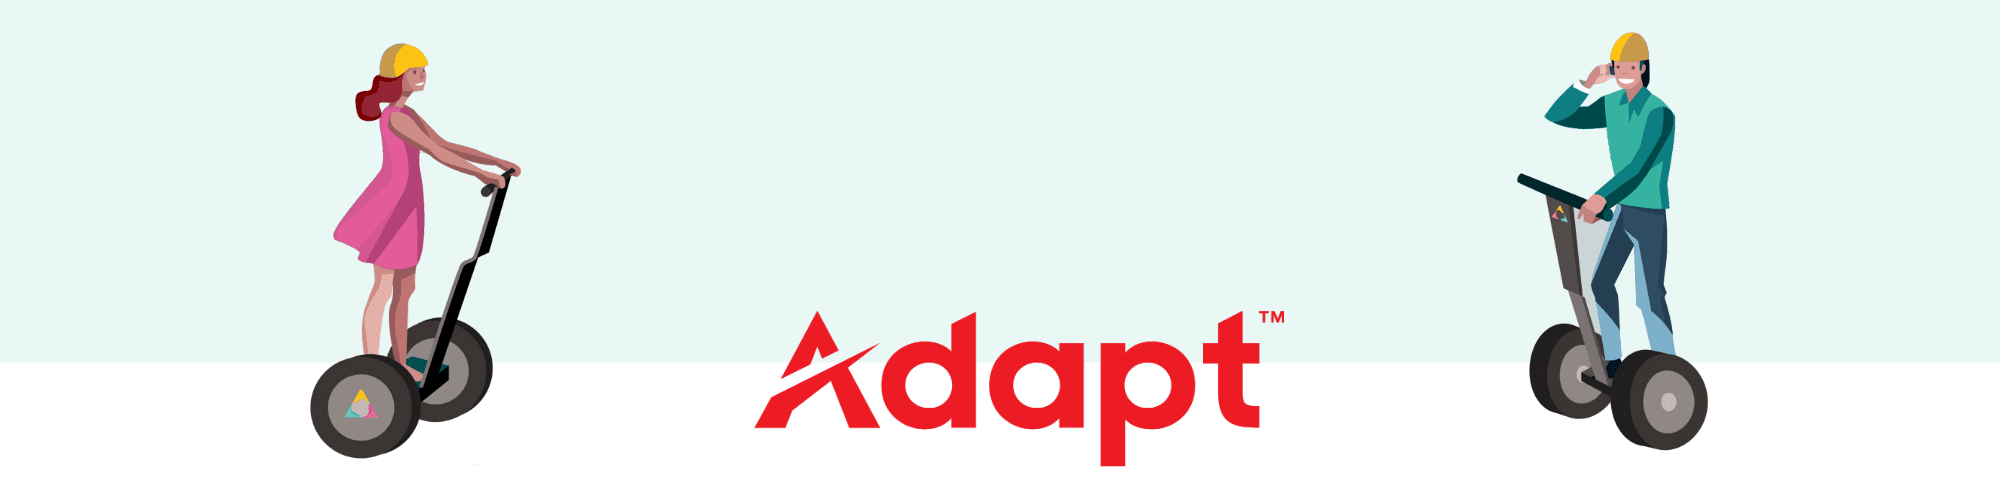 adapt-tips-hacks-hiit-for-busy-recruiters